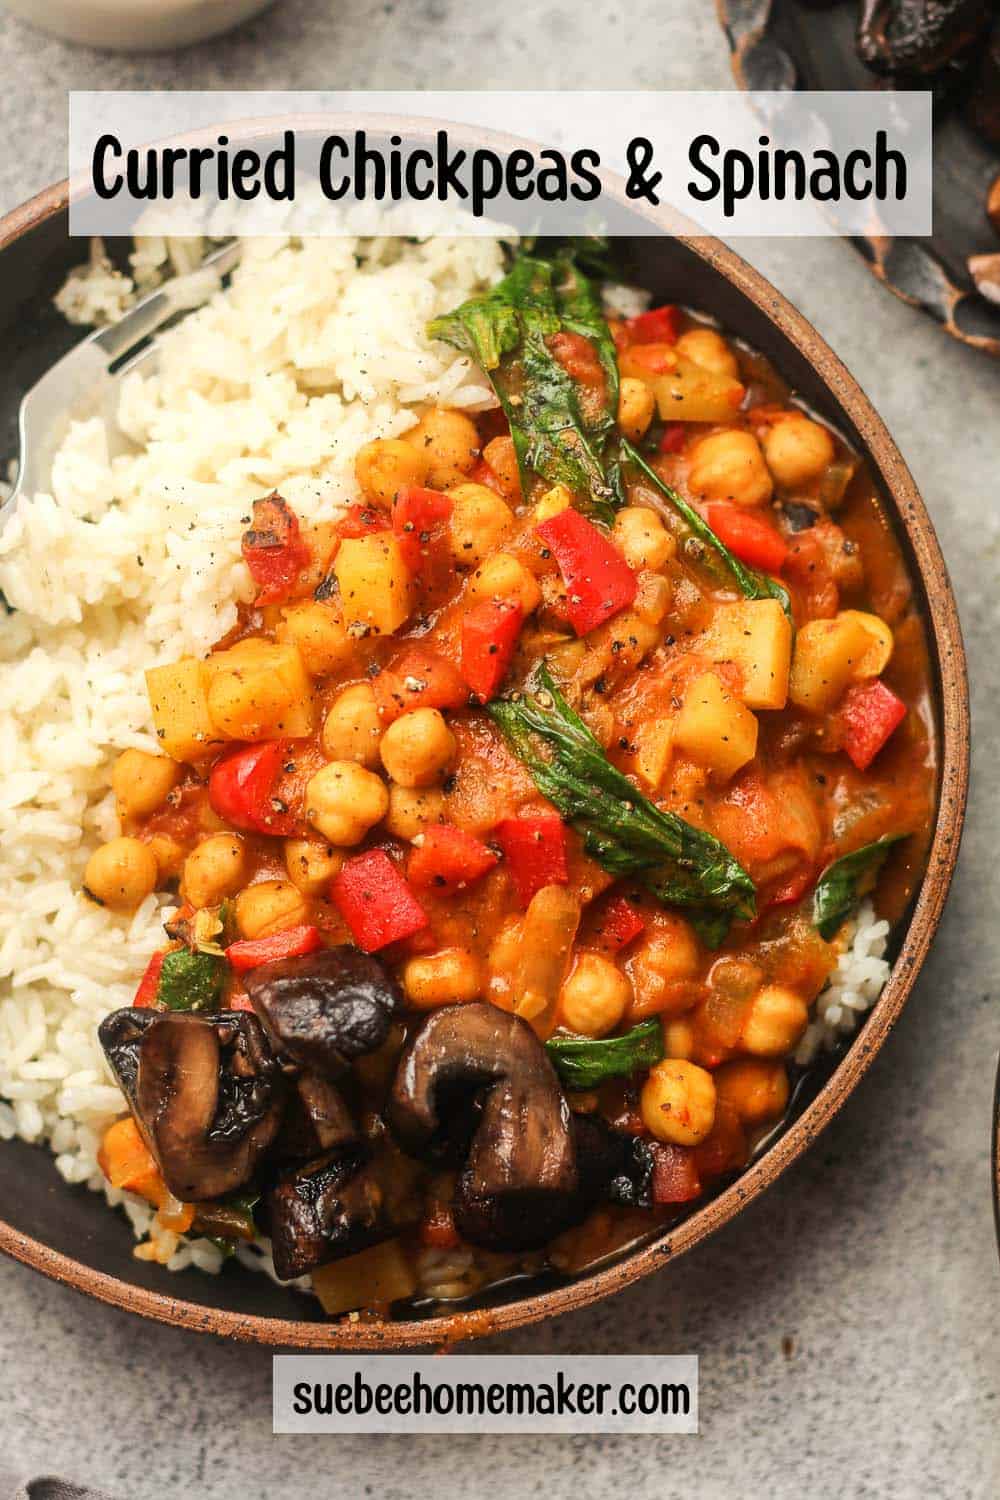 A bowl of chickpea curry with spinach and rice.